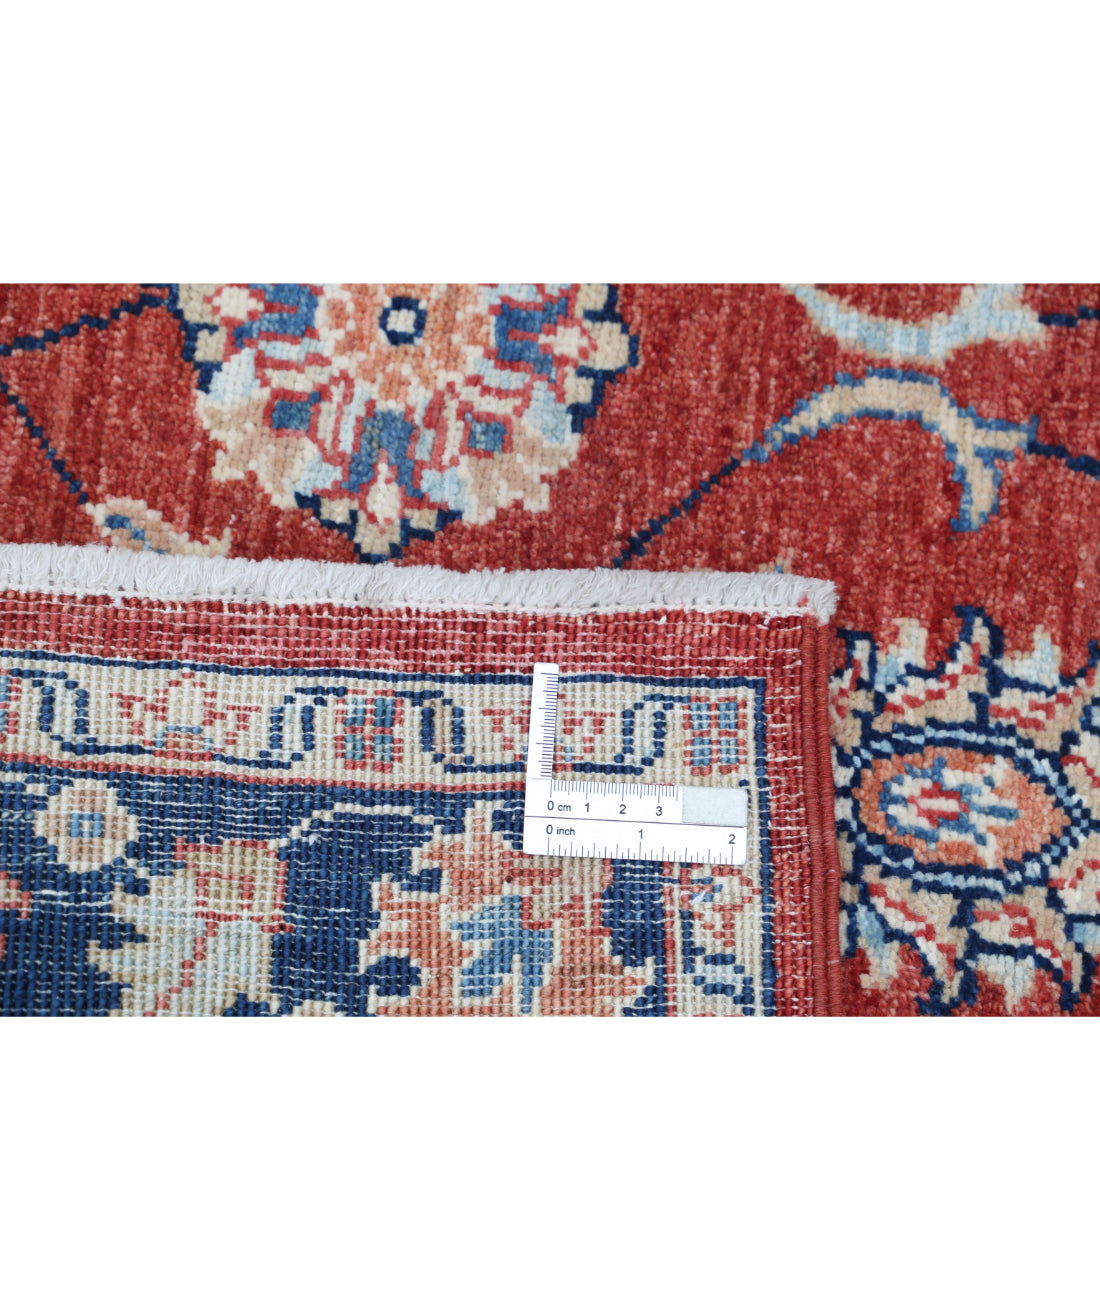 Ziegler 2'9'' X 4'2'' Hand-Knotted Wool Rug 2'9'' x 4'2'' (83 X 125) / Red / Blue